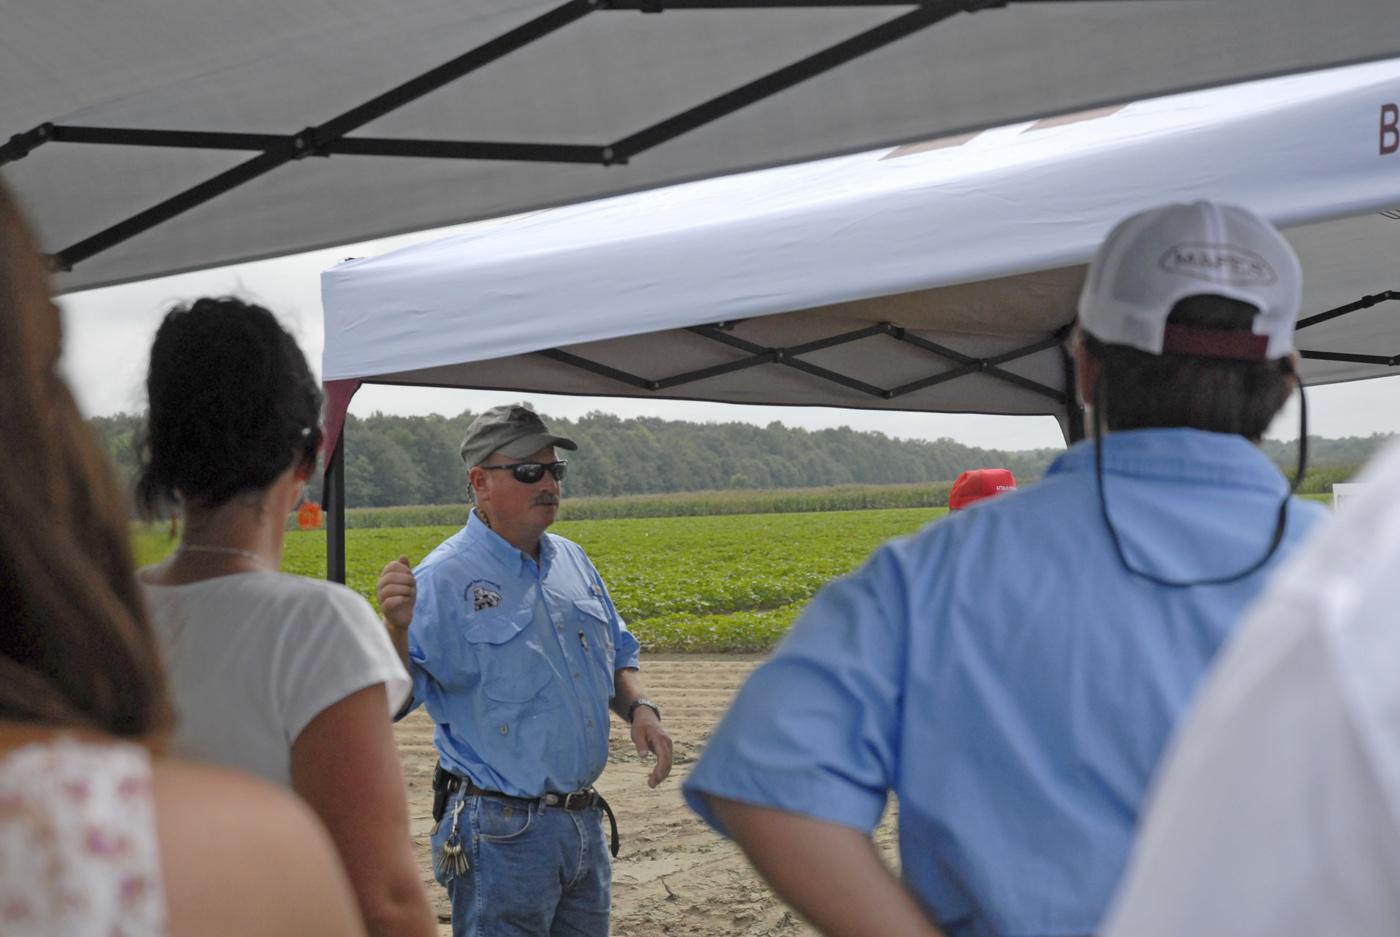 Don Cook, Mississippi Agricultural and Forestry Experiment Station researcher, spoke on insect issues related to the state’s primary row crops at the Agronomic Crops Field Day at the R.R. Foil Plant Science Research Center in Starkville.